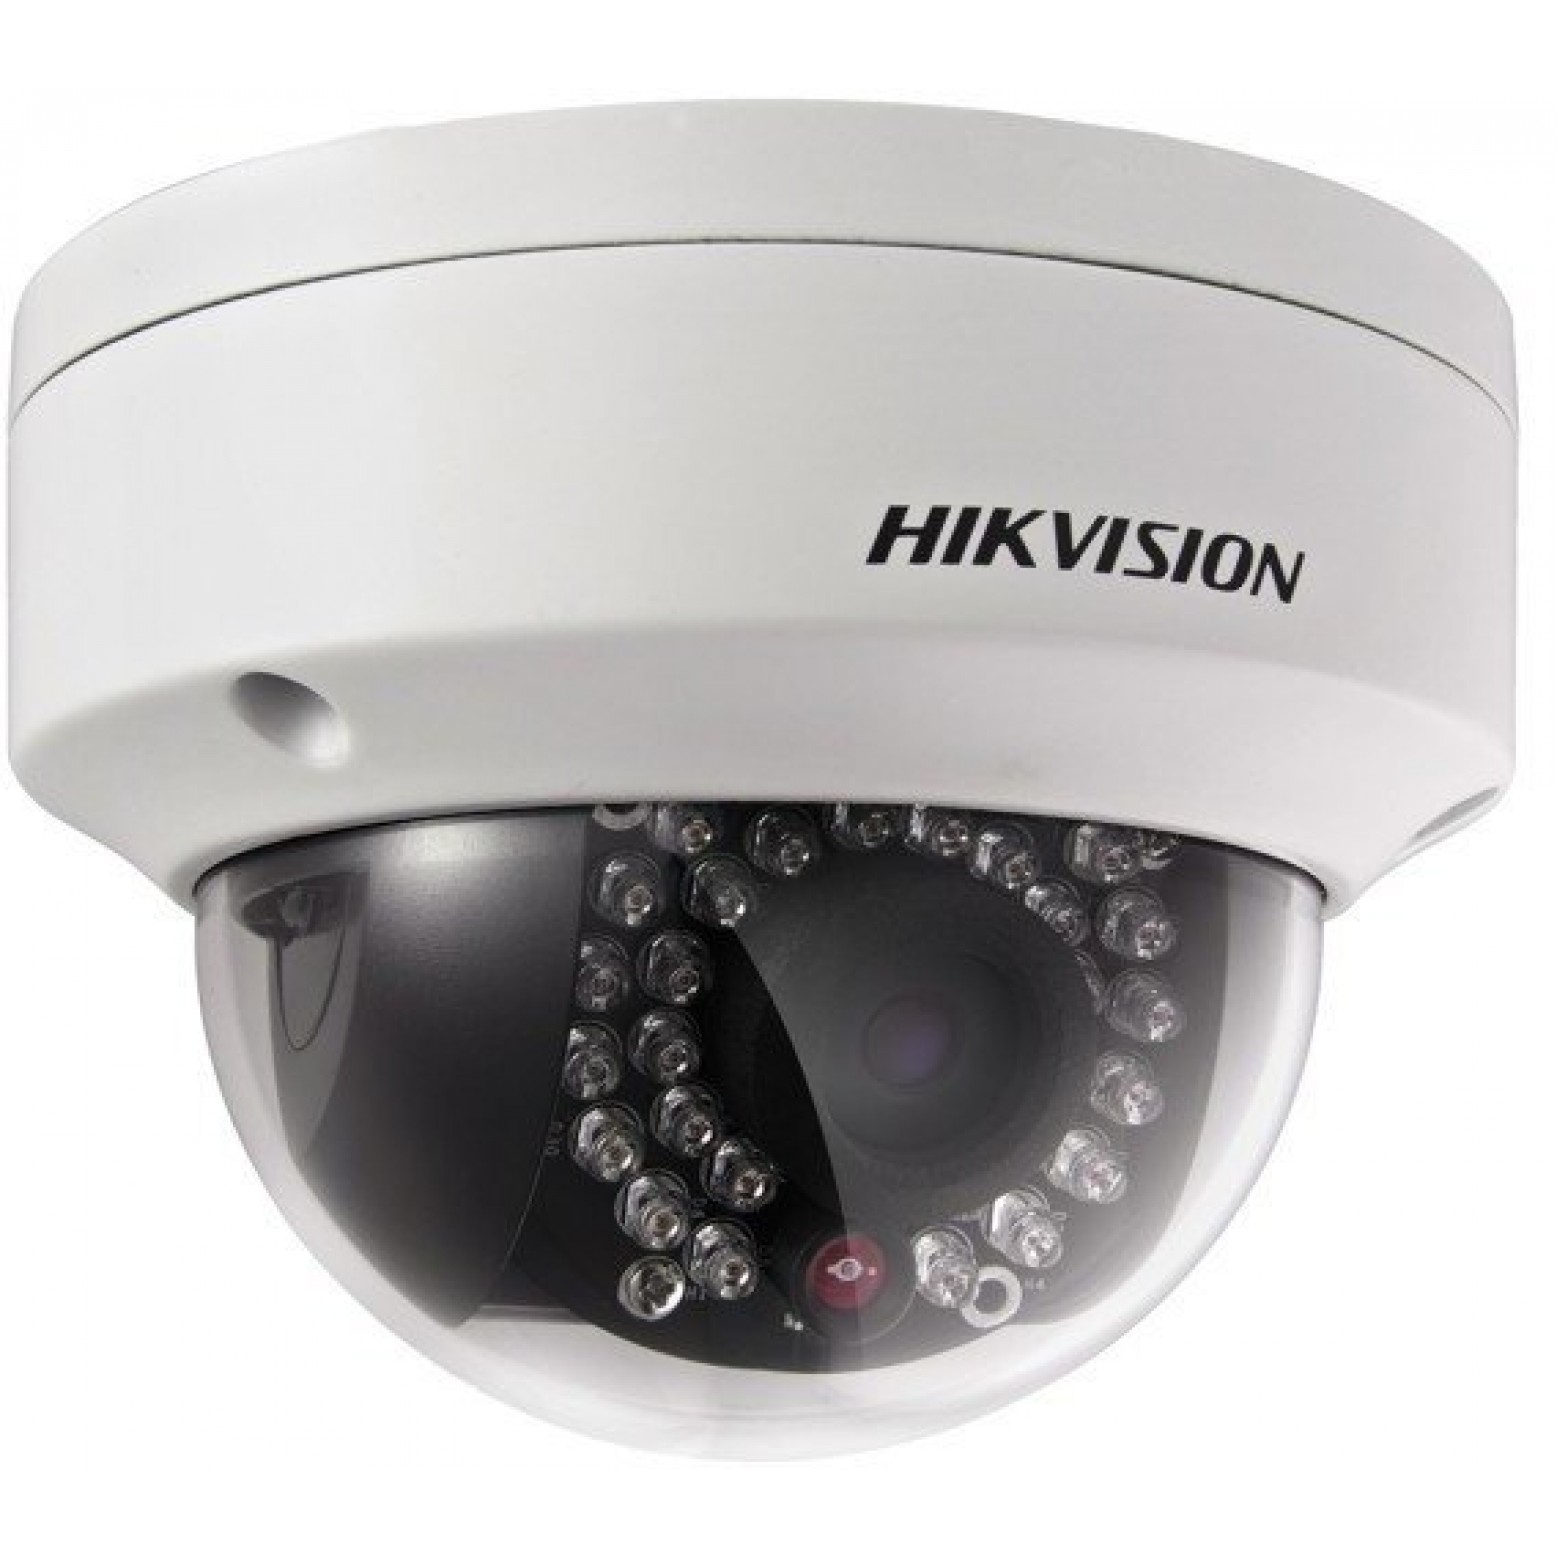 Hikvision DS-2CD2132F-IW WiFi 3MP Dome Camera